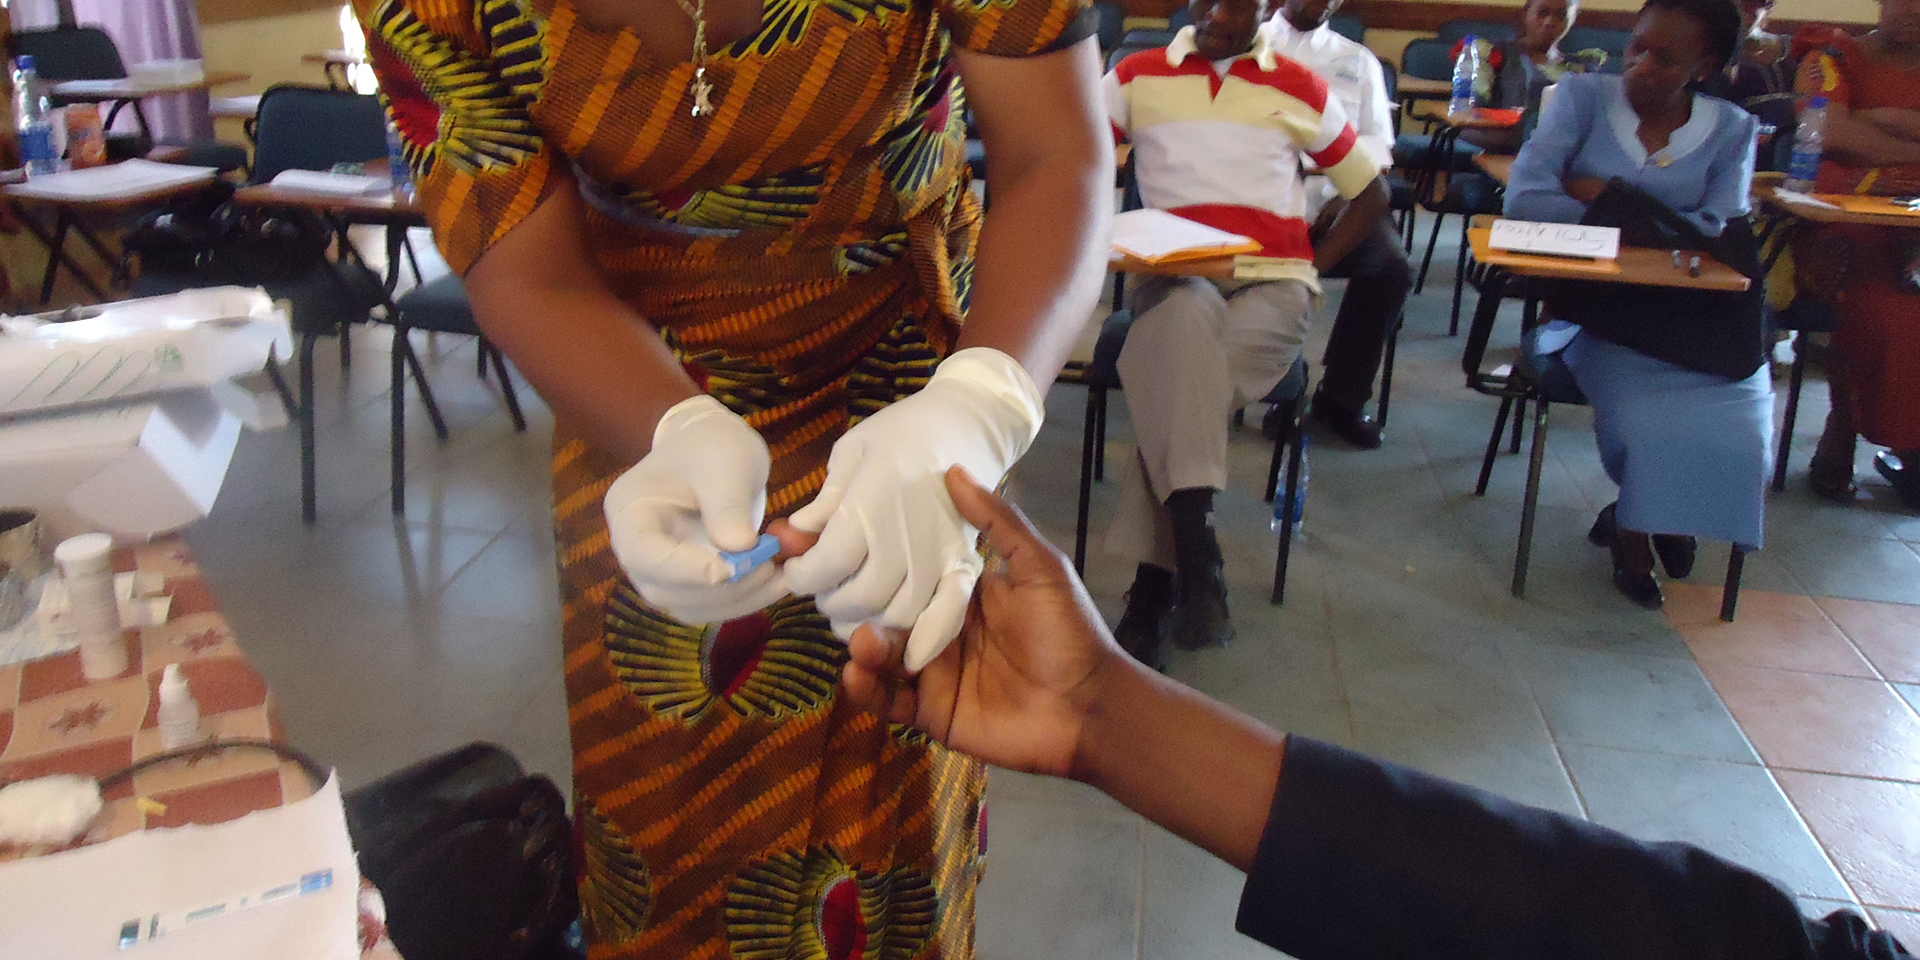 Image of a woman performing a medical test by pricking someone's finger.